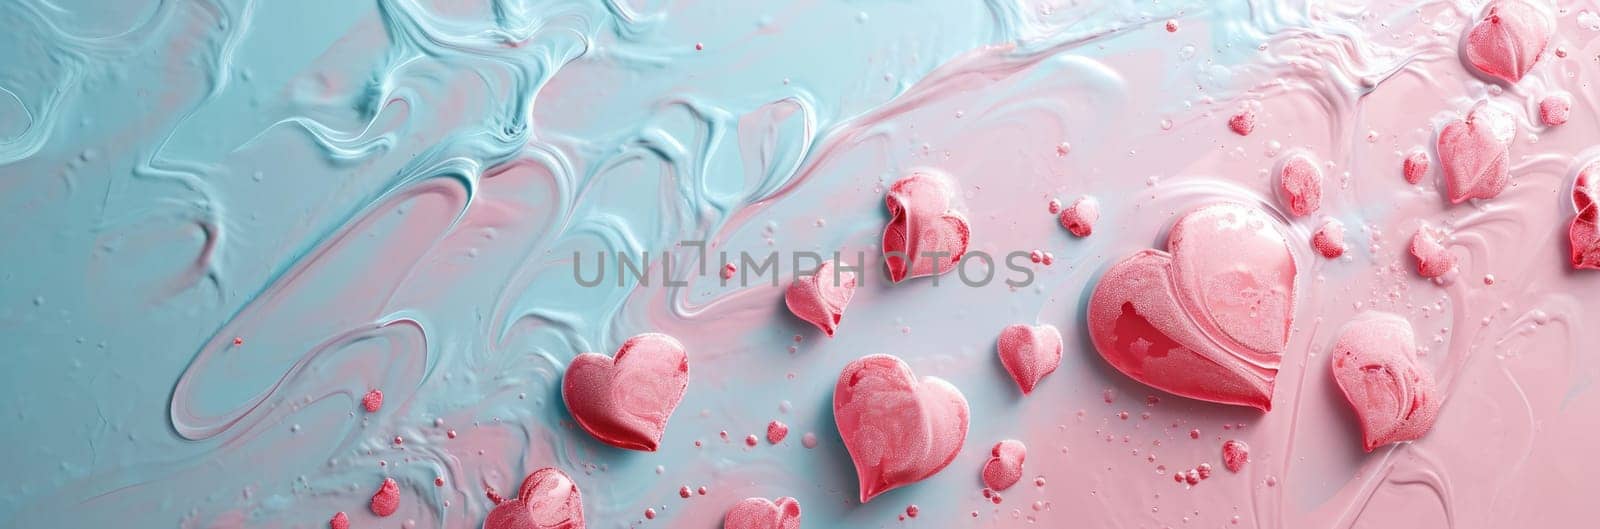 pink hearts valentines day abstract background backdrop pragma by biancoblue